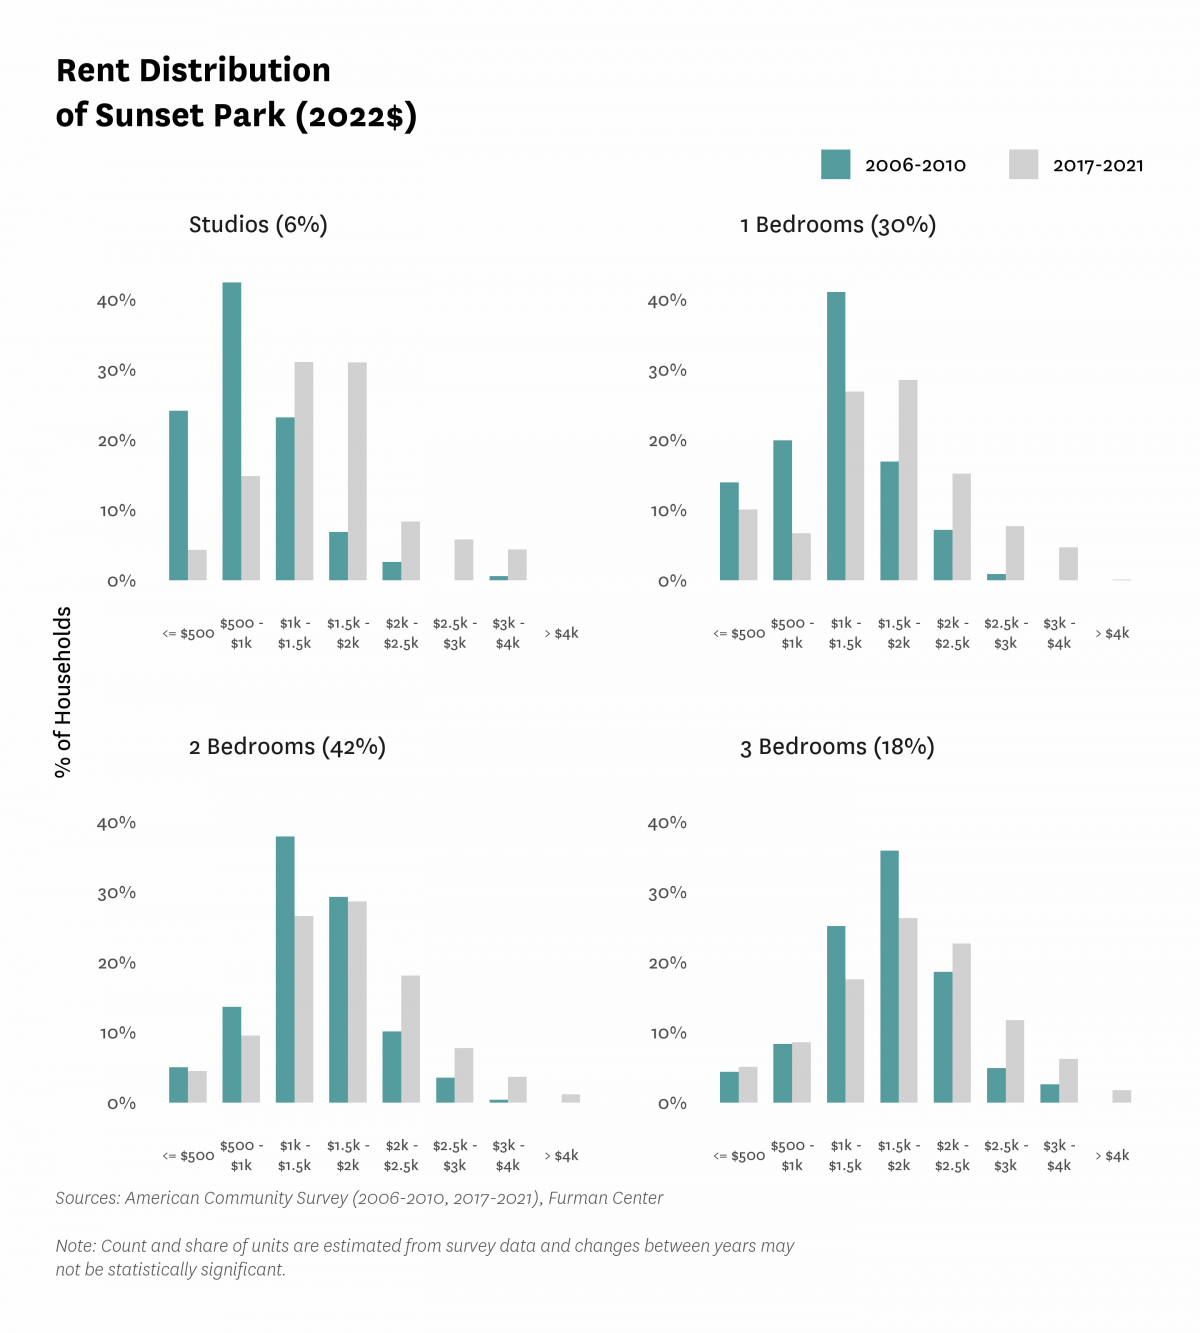 Graph showing the distribution of rents in Sunset Park in both 2010 and 2017-2021.